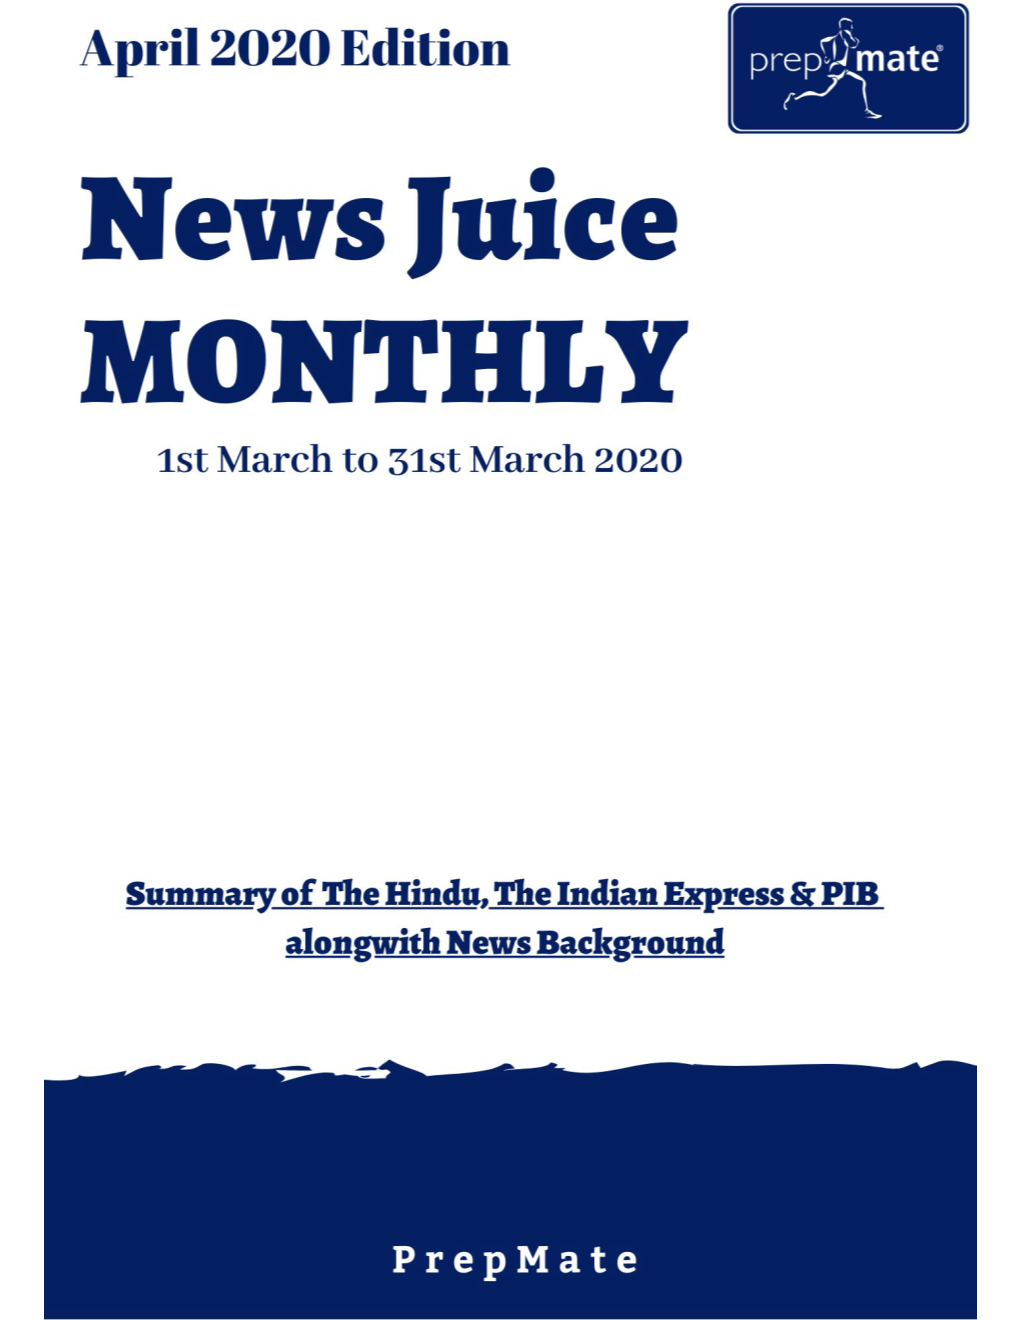 News Juice Monthly – April 2020 Edition